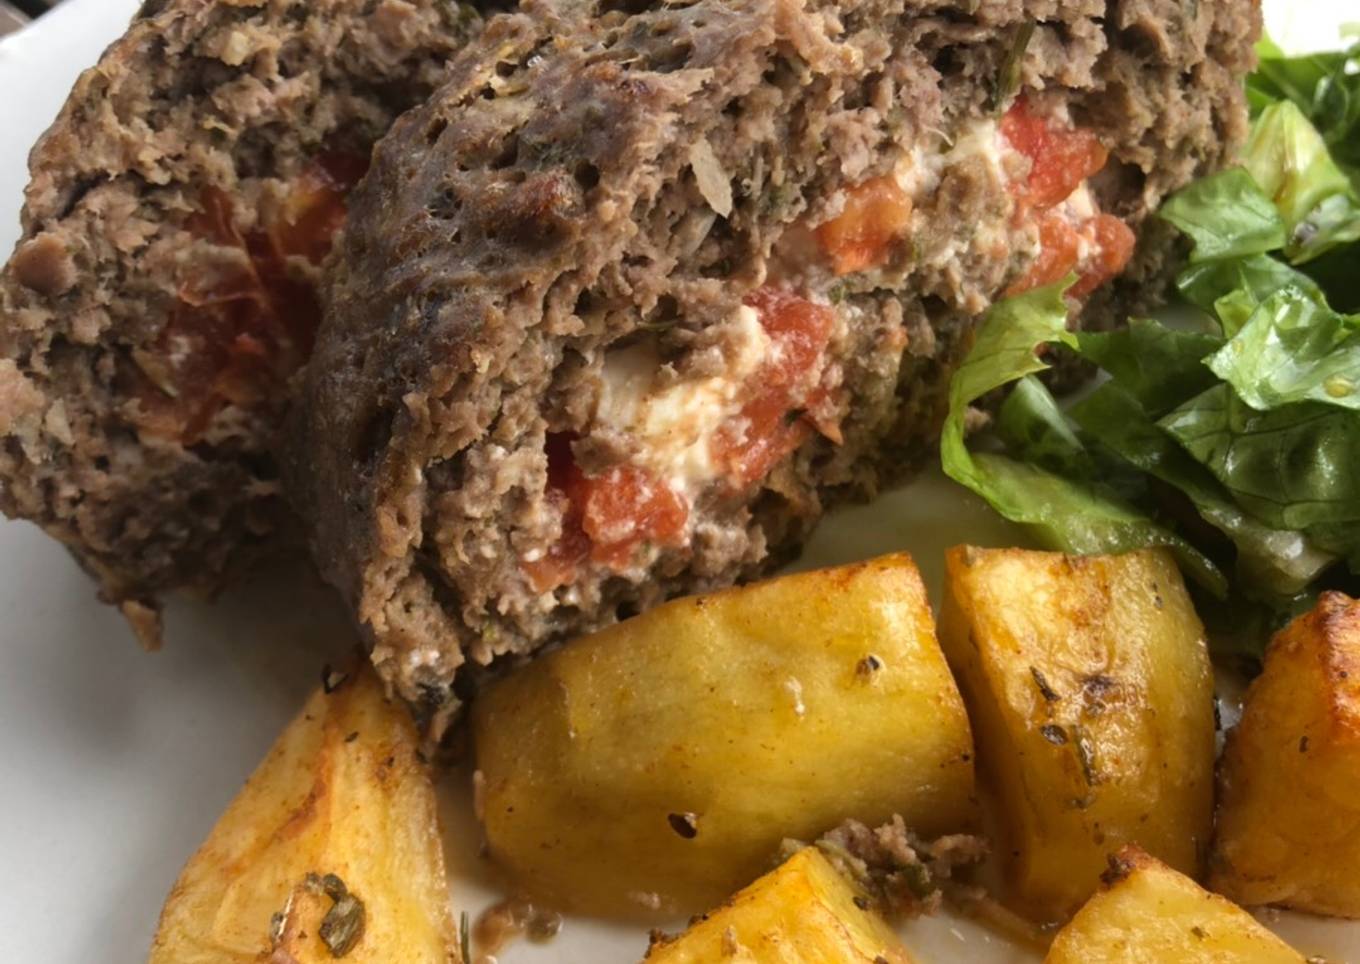 Meatloaf with a Greek touch